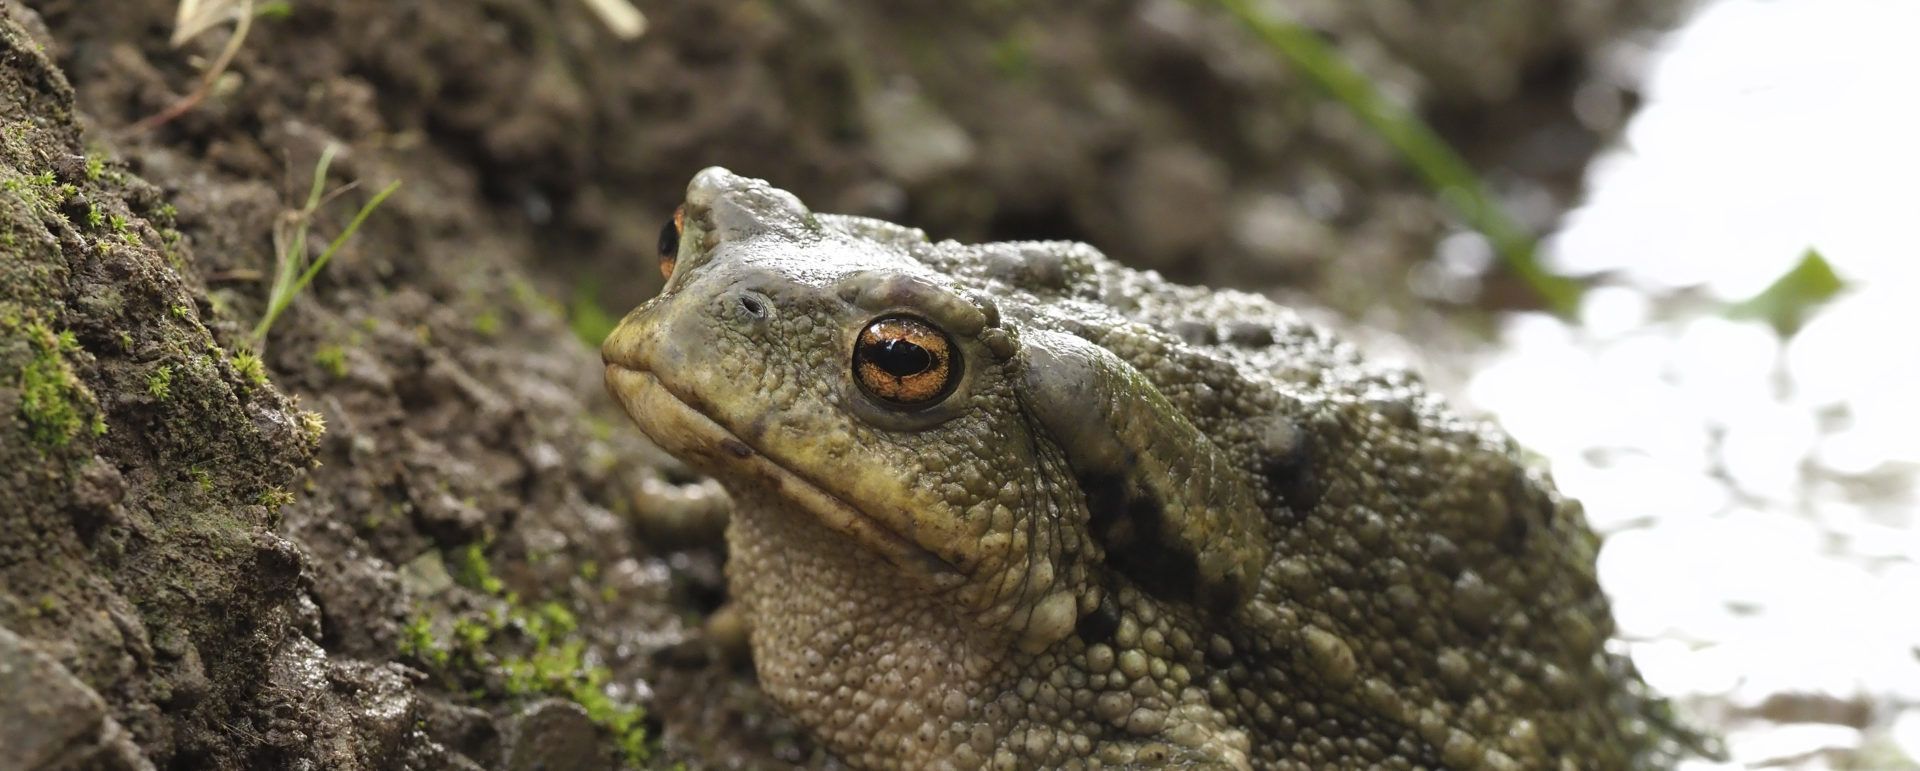 Learn about the dangers that amphibians face and how you can help them